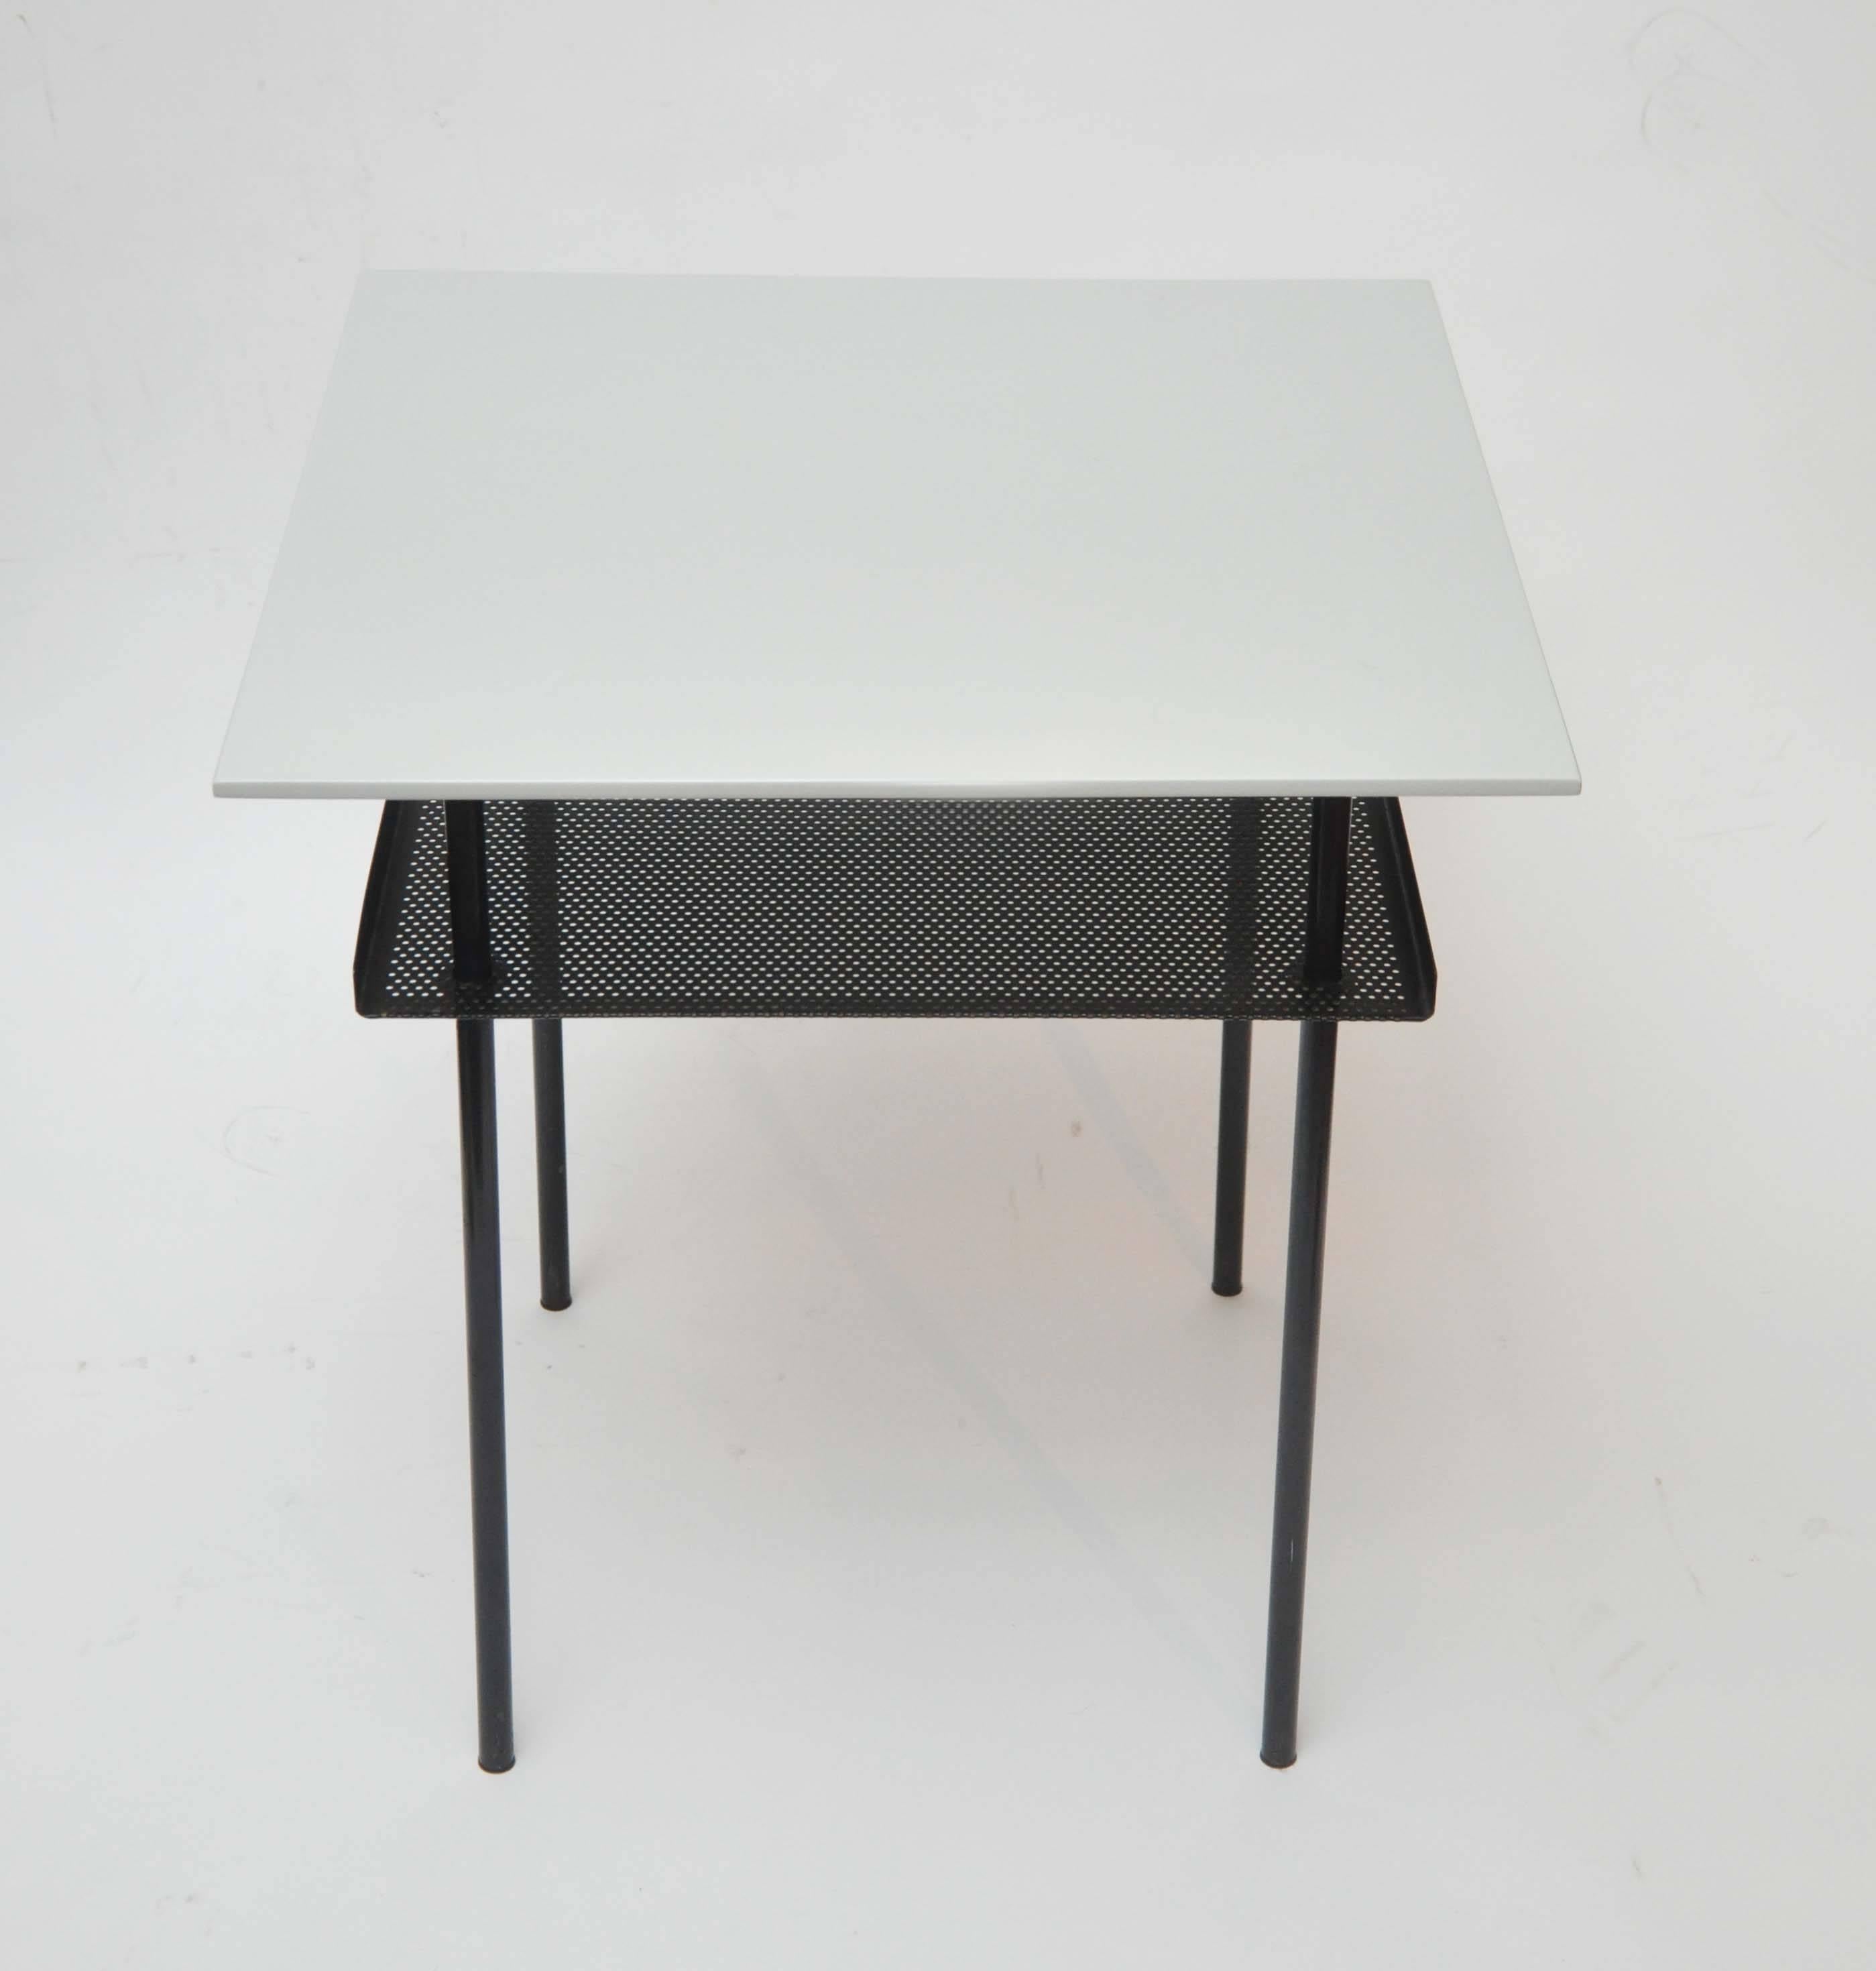 Early 20th- century Dutch designer Vim Rietveld Auping side tables from the Netherlands,circa 1950, Holland.

Two white top side tables with black metal bases features a mesh metal shelf underneath.

Dimensions: 20.5